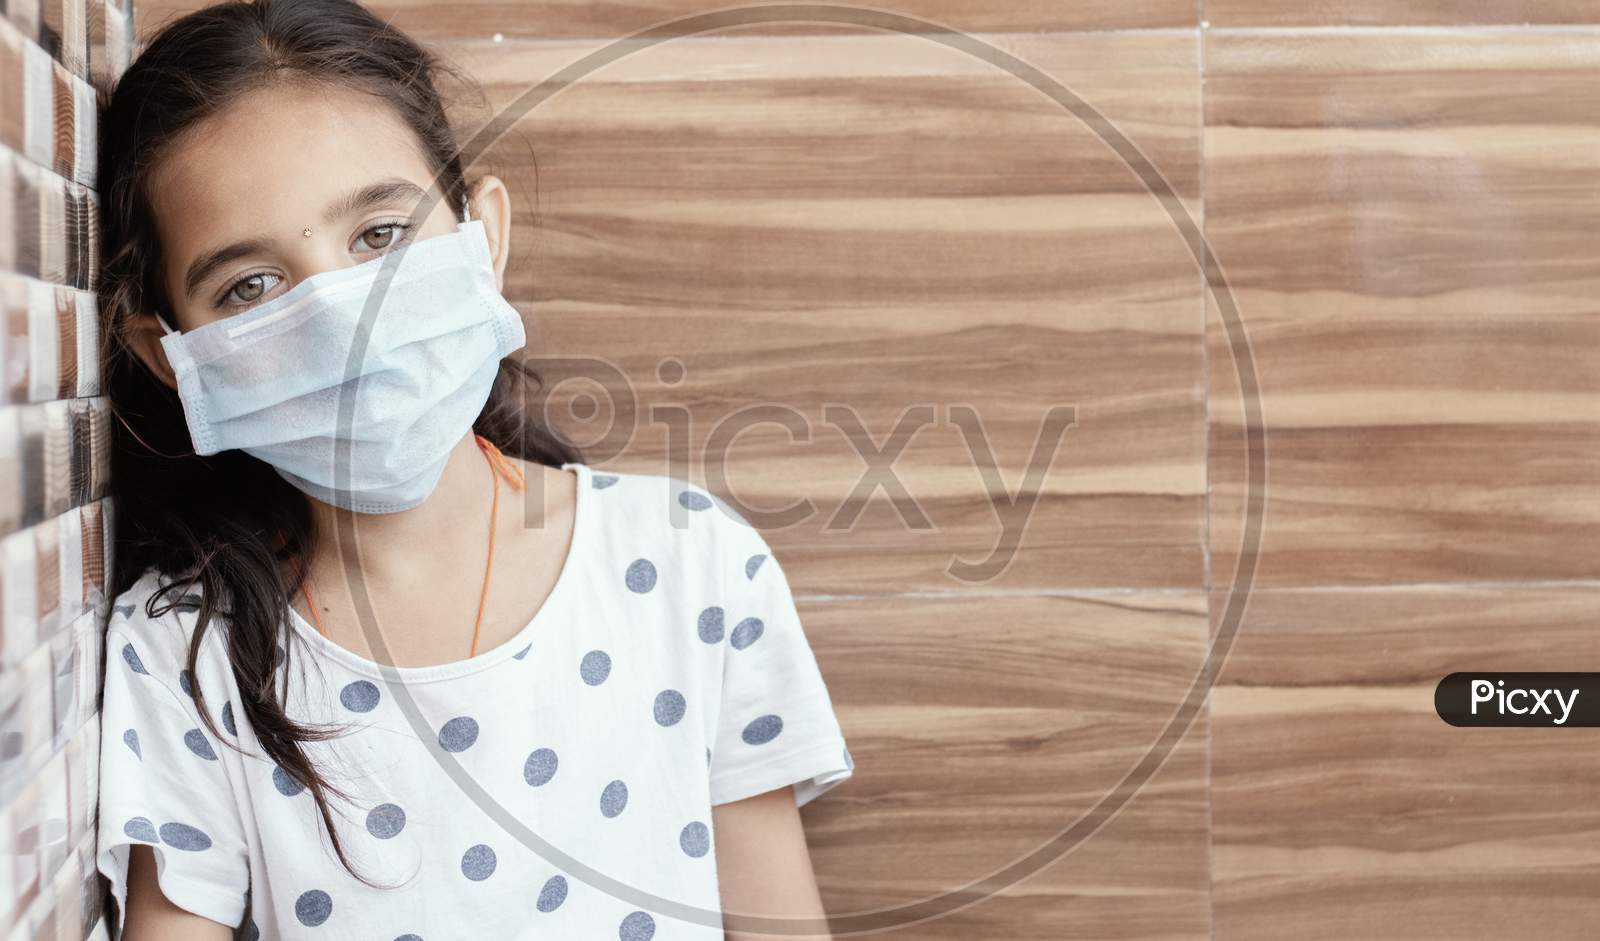 Concept Of Ptsd Or Post-Traumatic Stress Disorder After Covid-19 Or Coronavirus Pandemic - Young Teenager Girl With Medical Mask Wearing Sat By Leaning On Well In Sad, Fear, Or Anxiety.